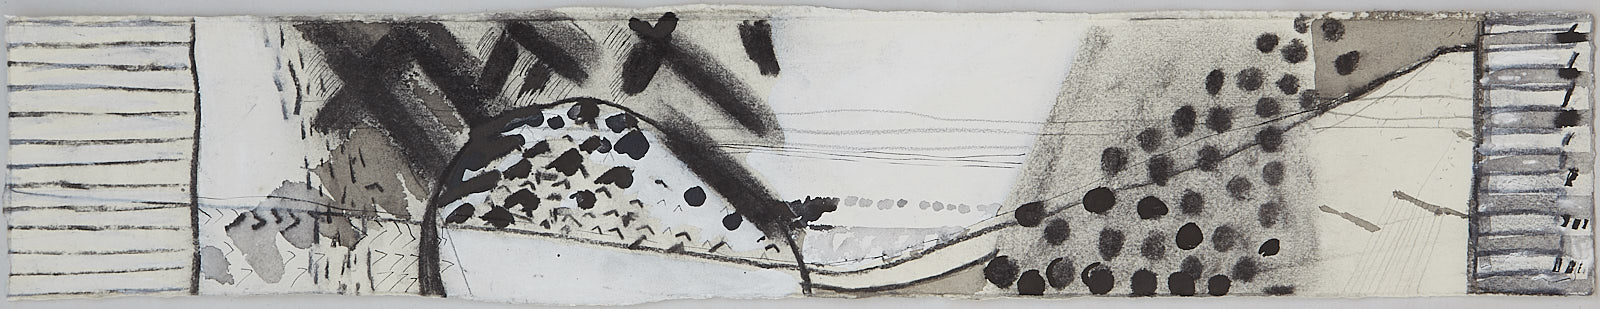 Charcoal ink and gouache on paper
69cm x 13cm
£800